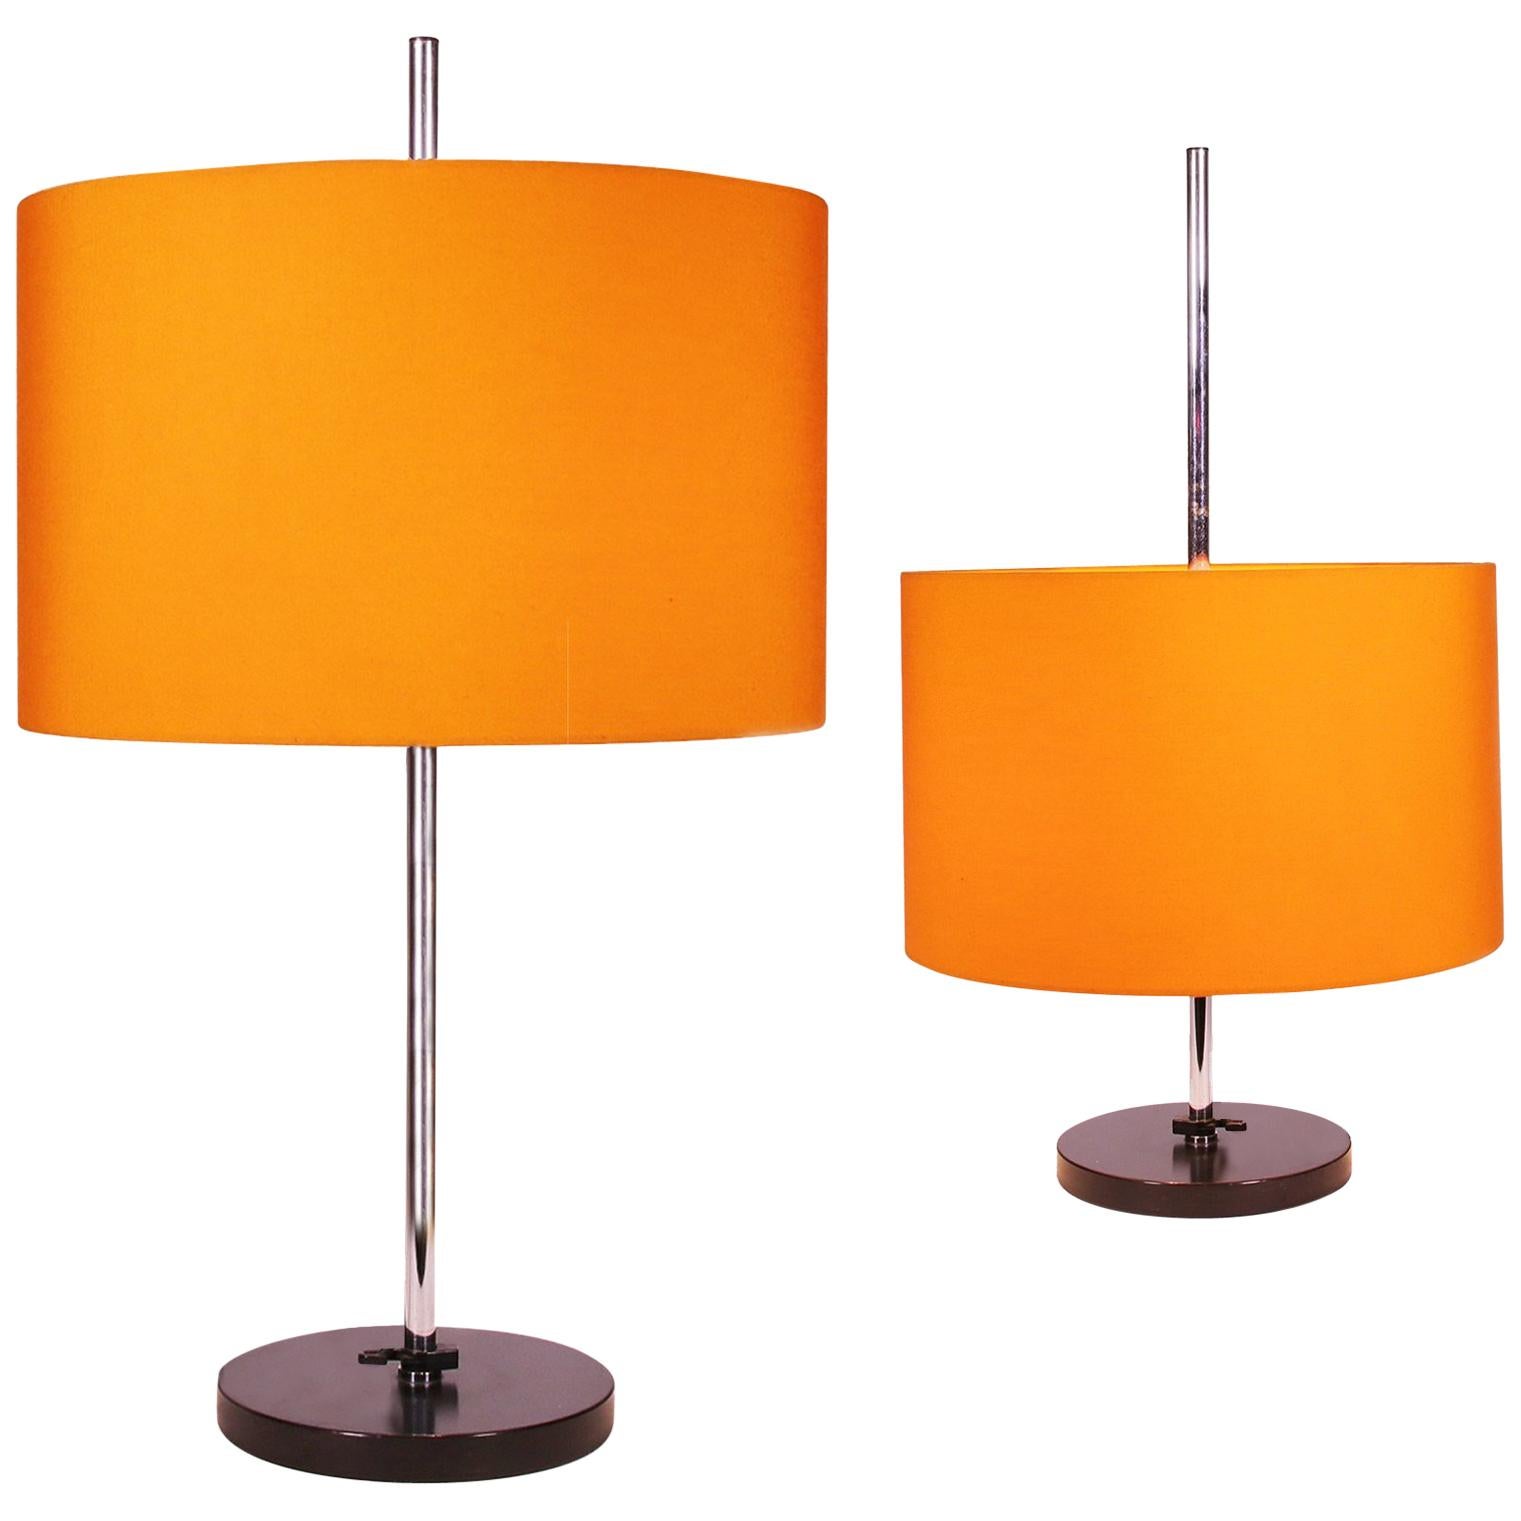 Pair of 2 Adjustable Table Lamps Orange by Staff Lighting, Germany, 1960s